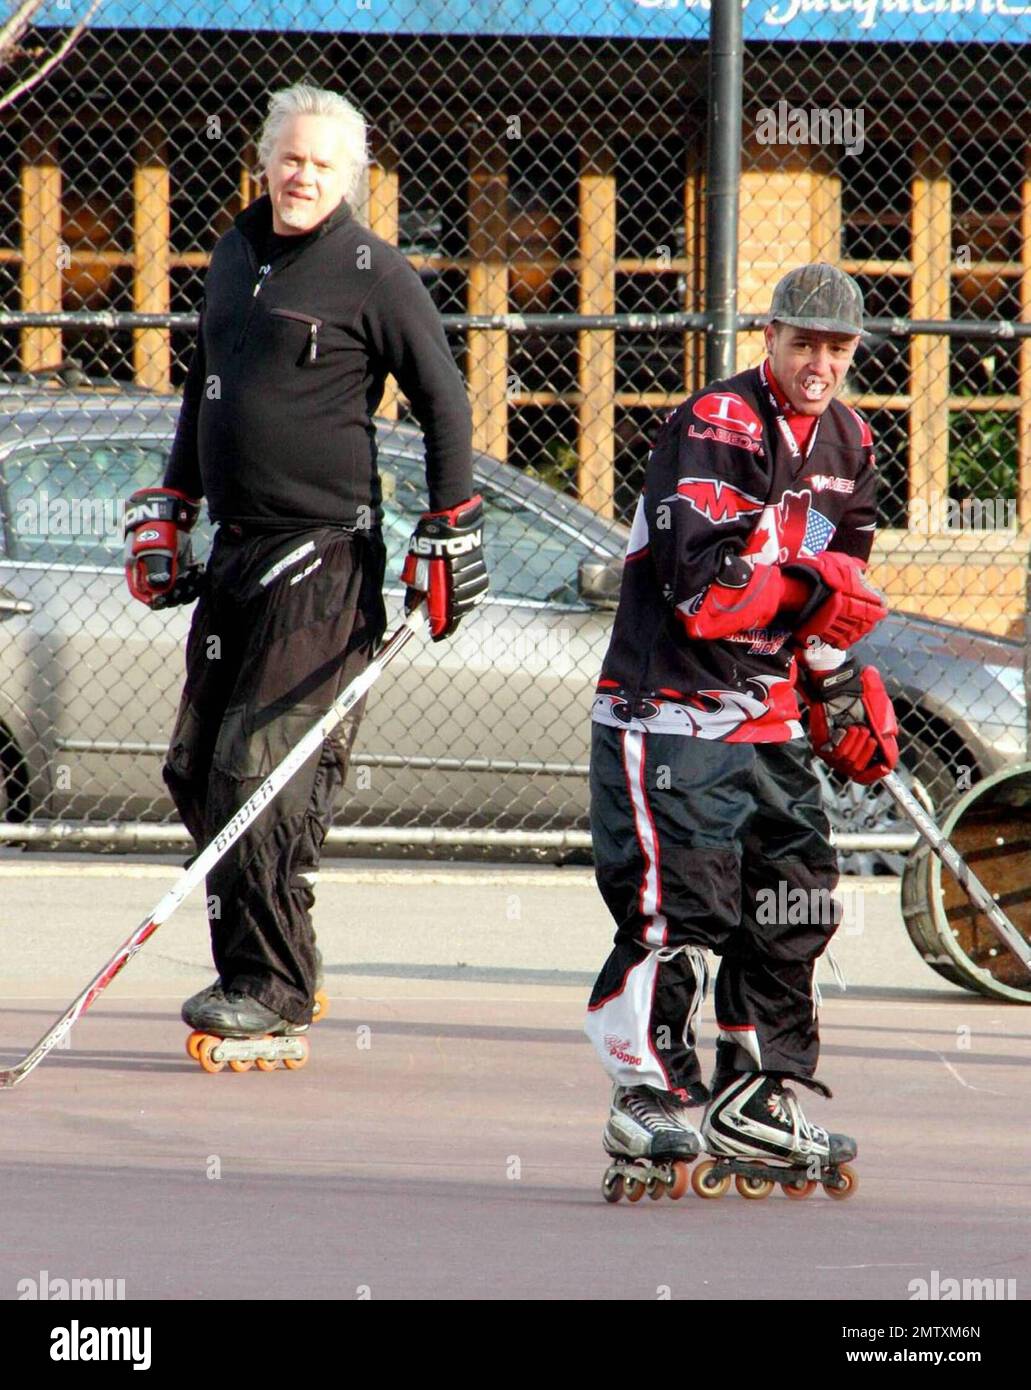 Actor Tim Robbins gets in a game of roller hockey with a group of friends  in Greenwich Village. Tim was swift on his feet and really got into the  game, but played